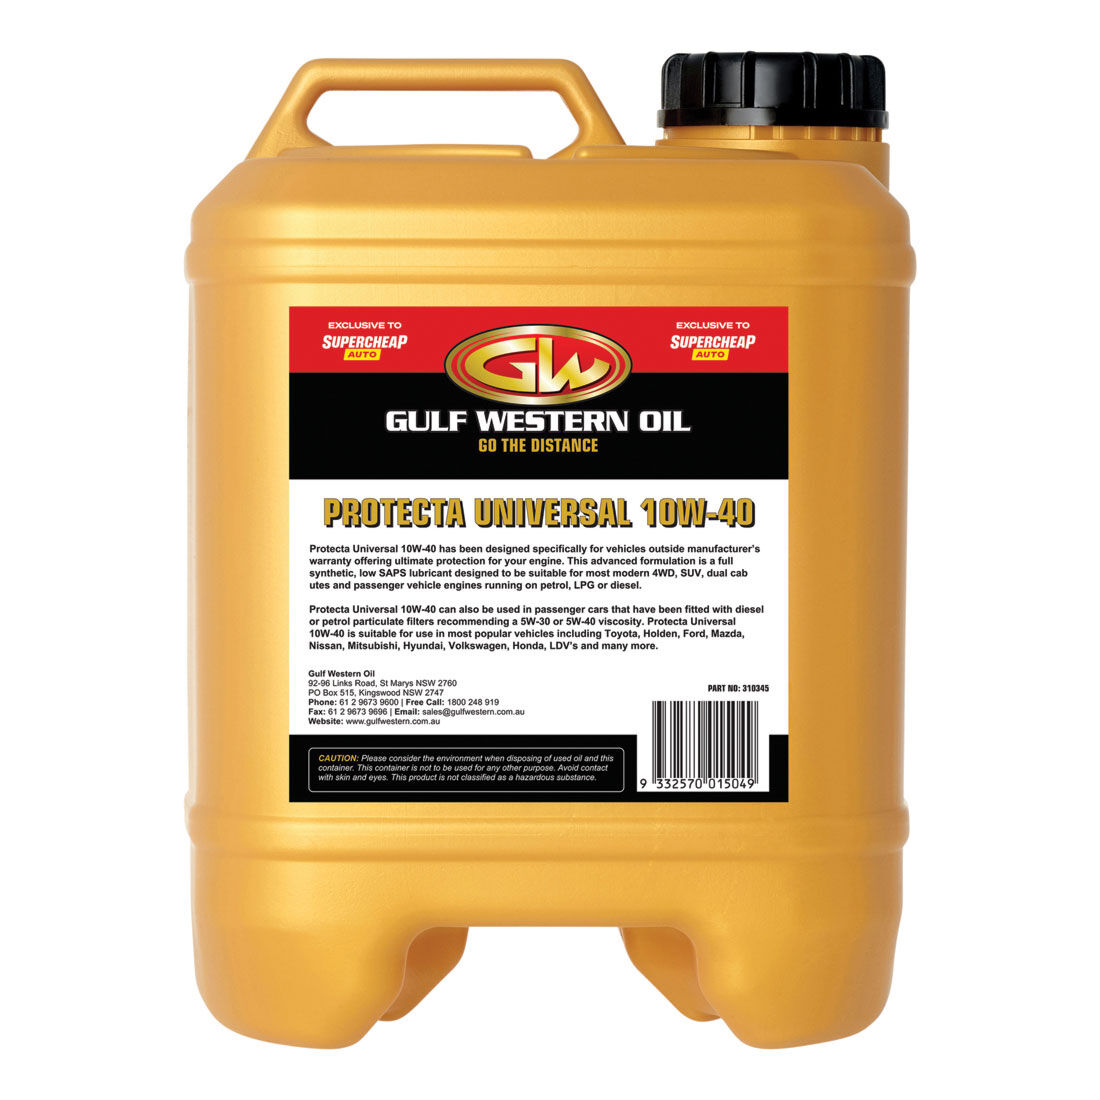 Gulf Western Protecta Universal 10W-40 Engine Oil 10 Litre, , scaau_hi-res